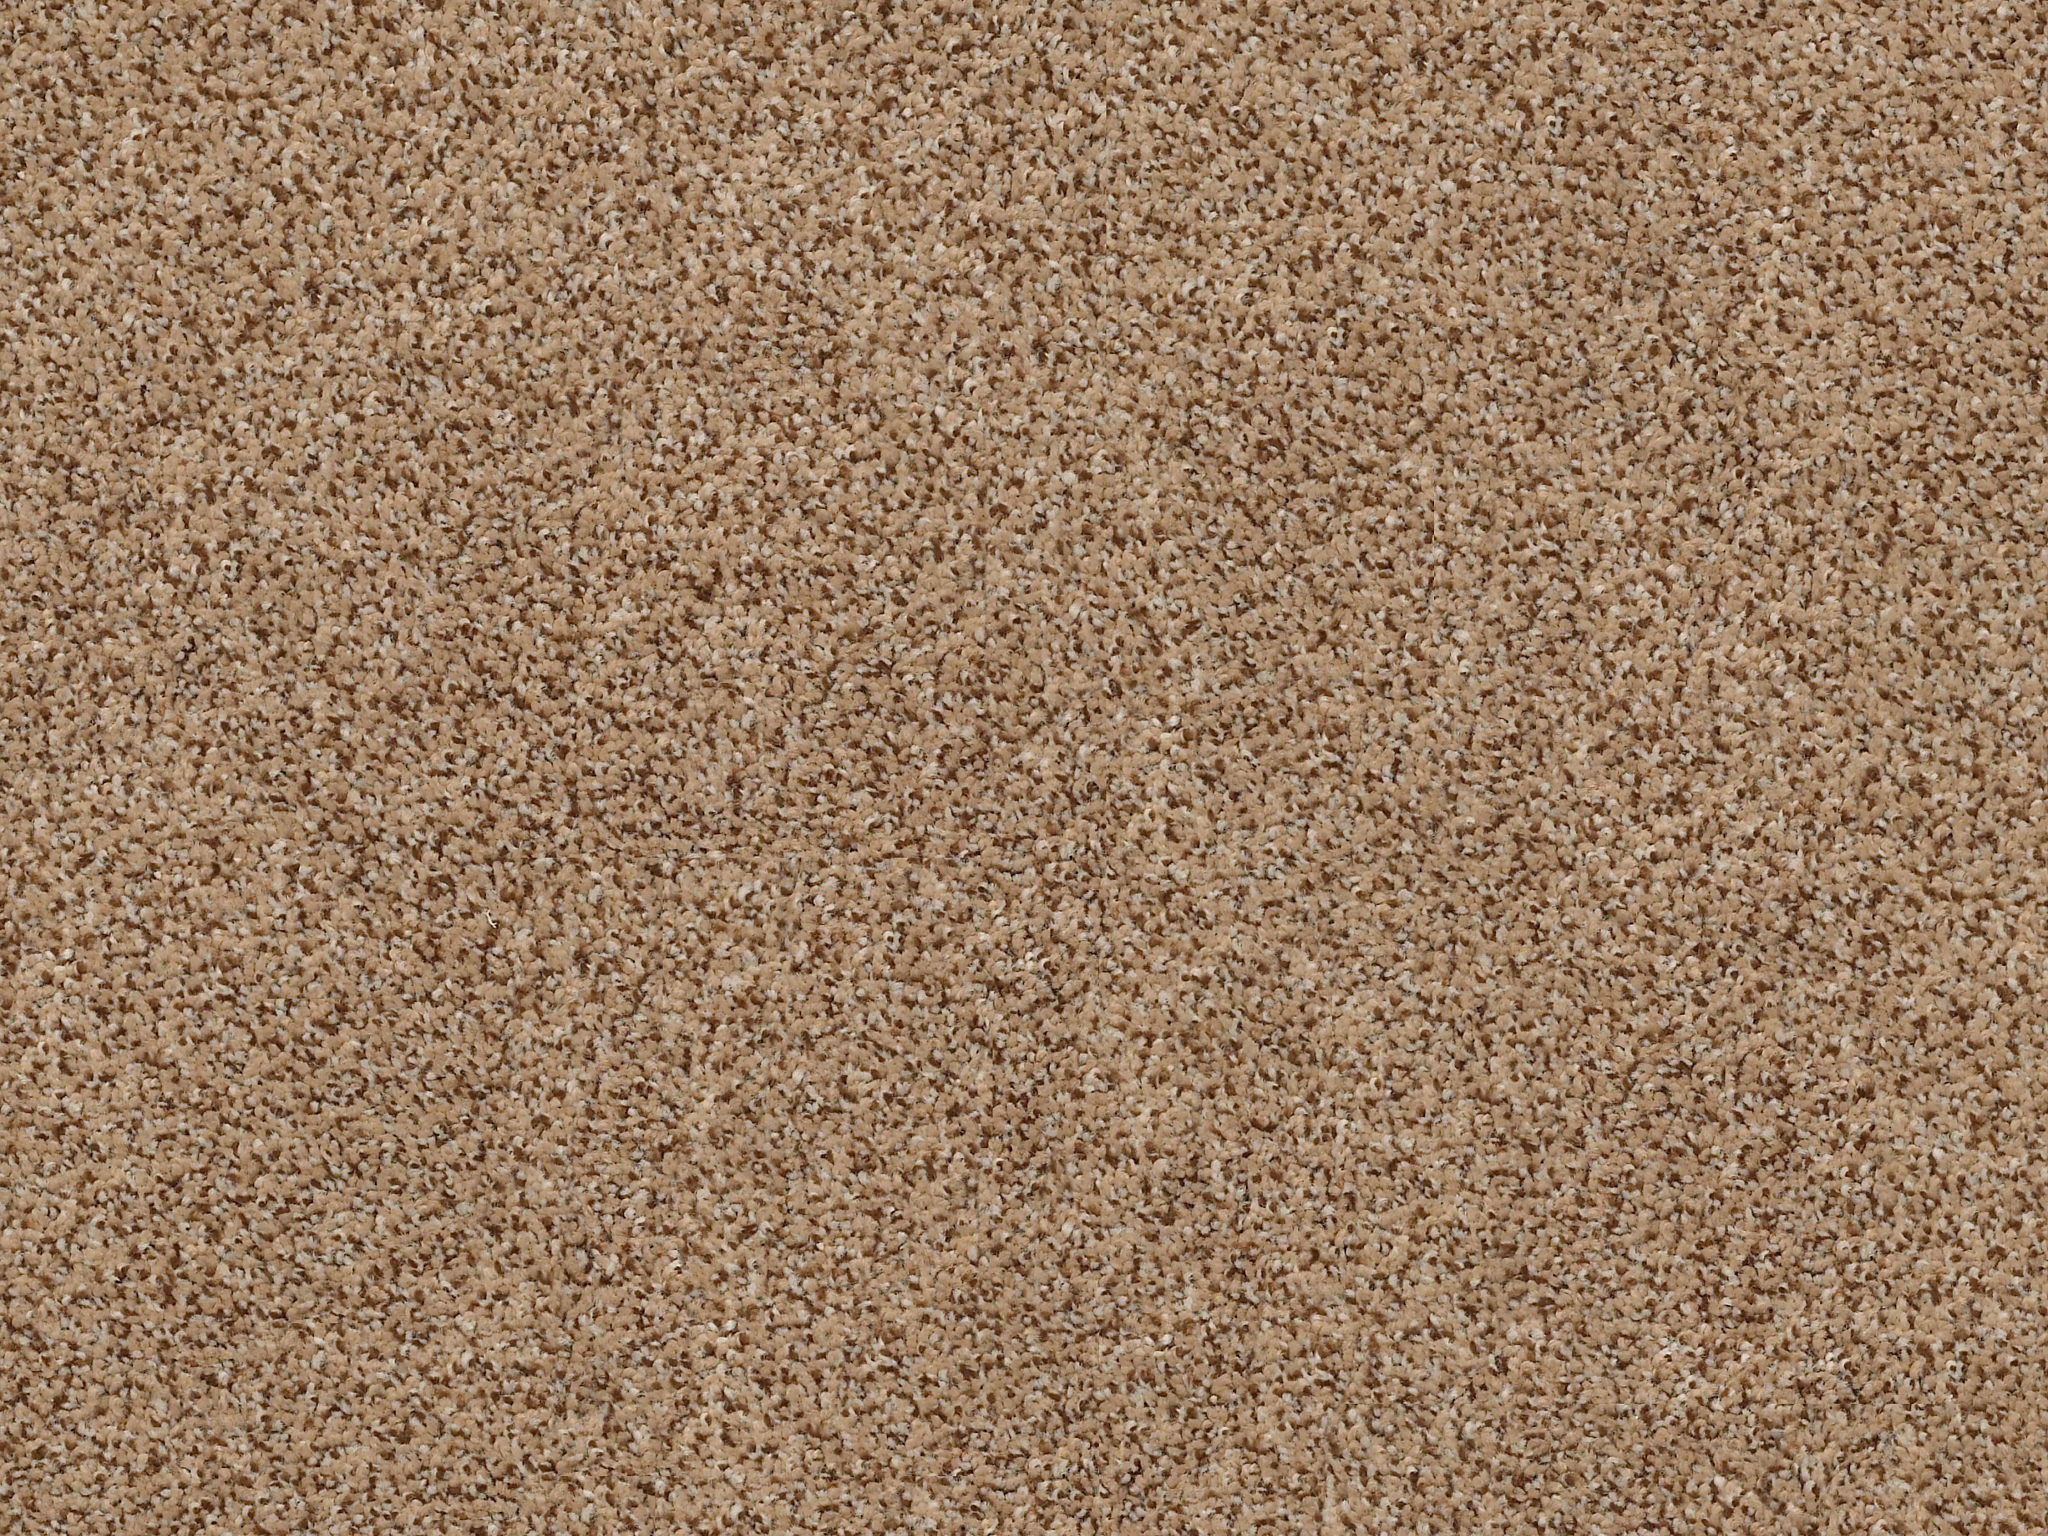 Serenity Cove Carpet - Desert View Zoomed Swatch Thumbnail